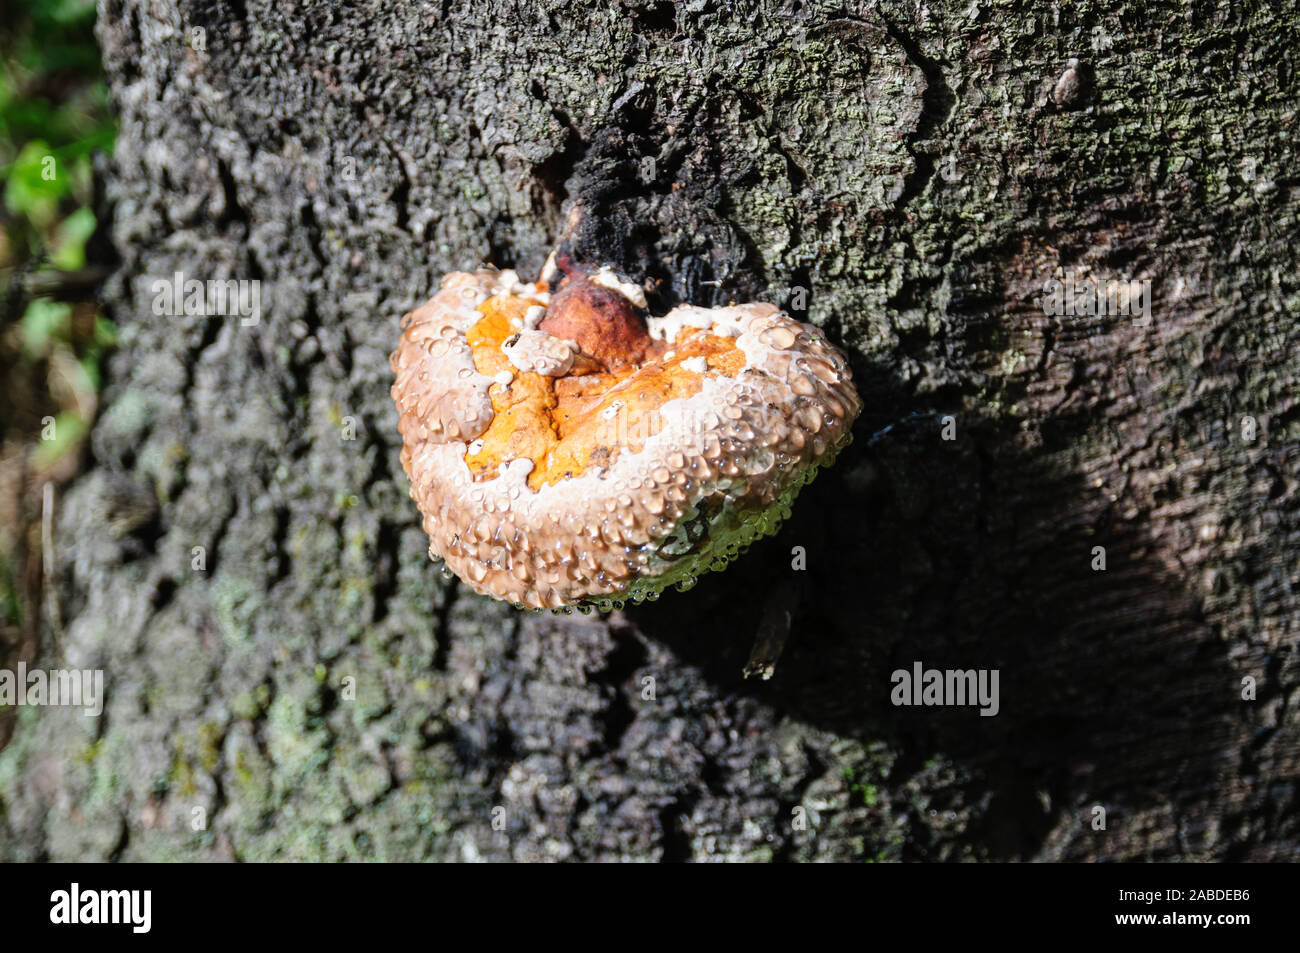 Mushroom Polyporus squamosus in spots on the trunk of a tree Stock Photo